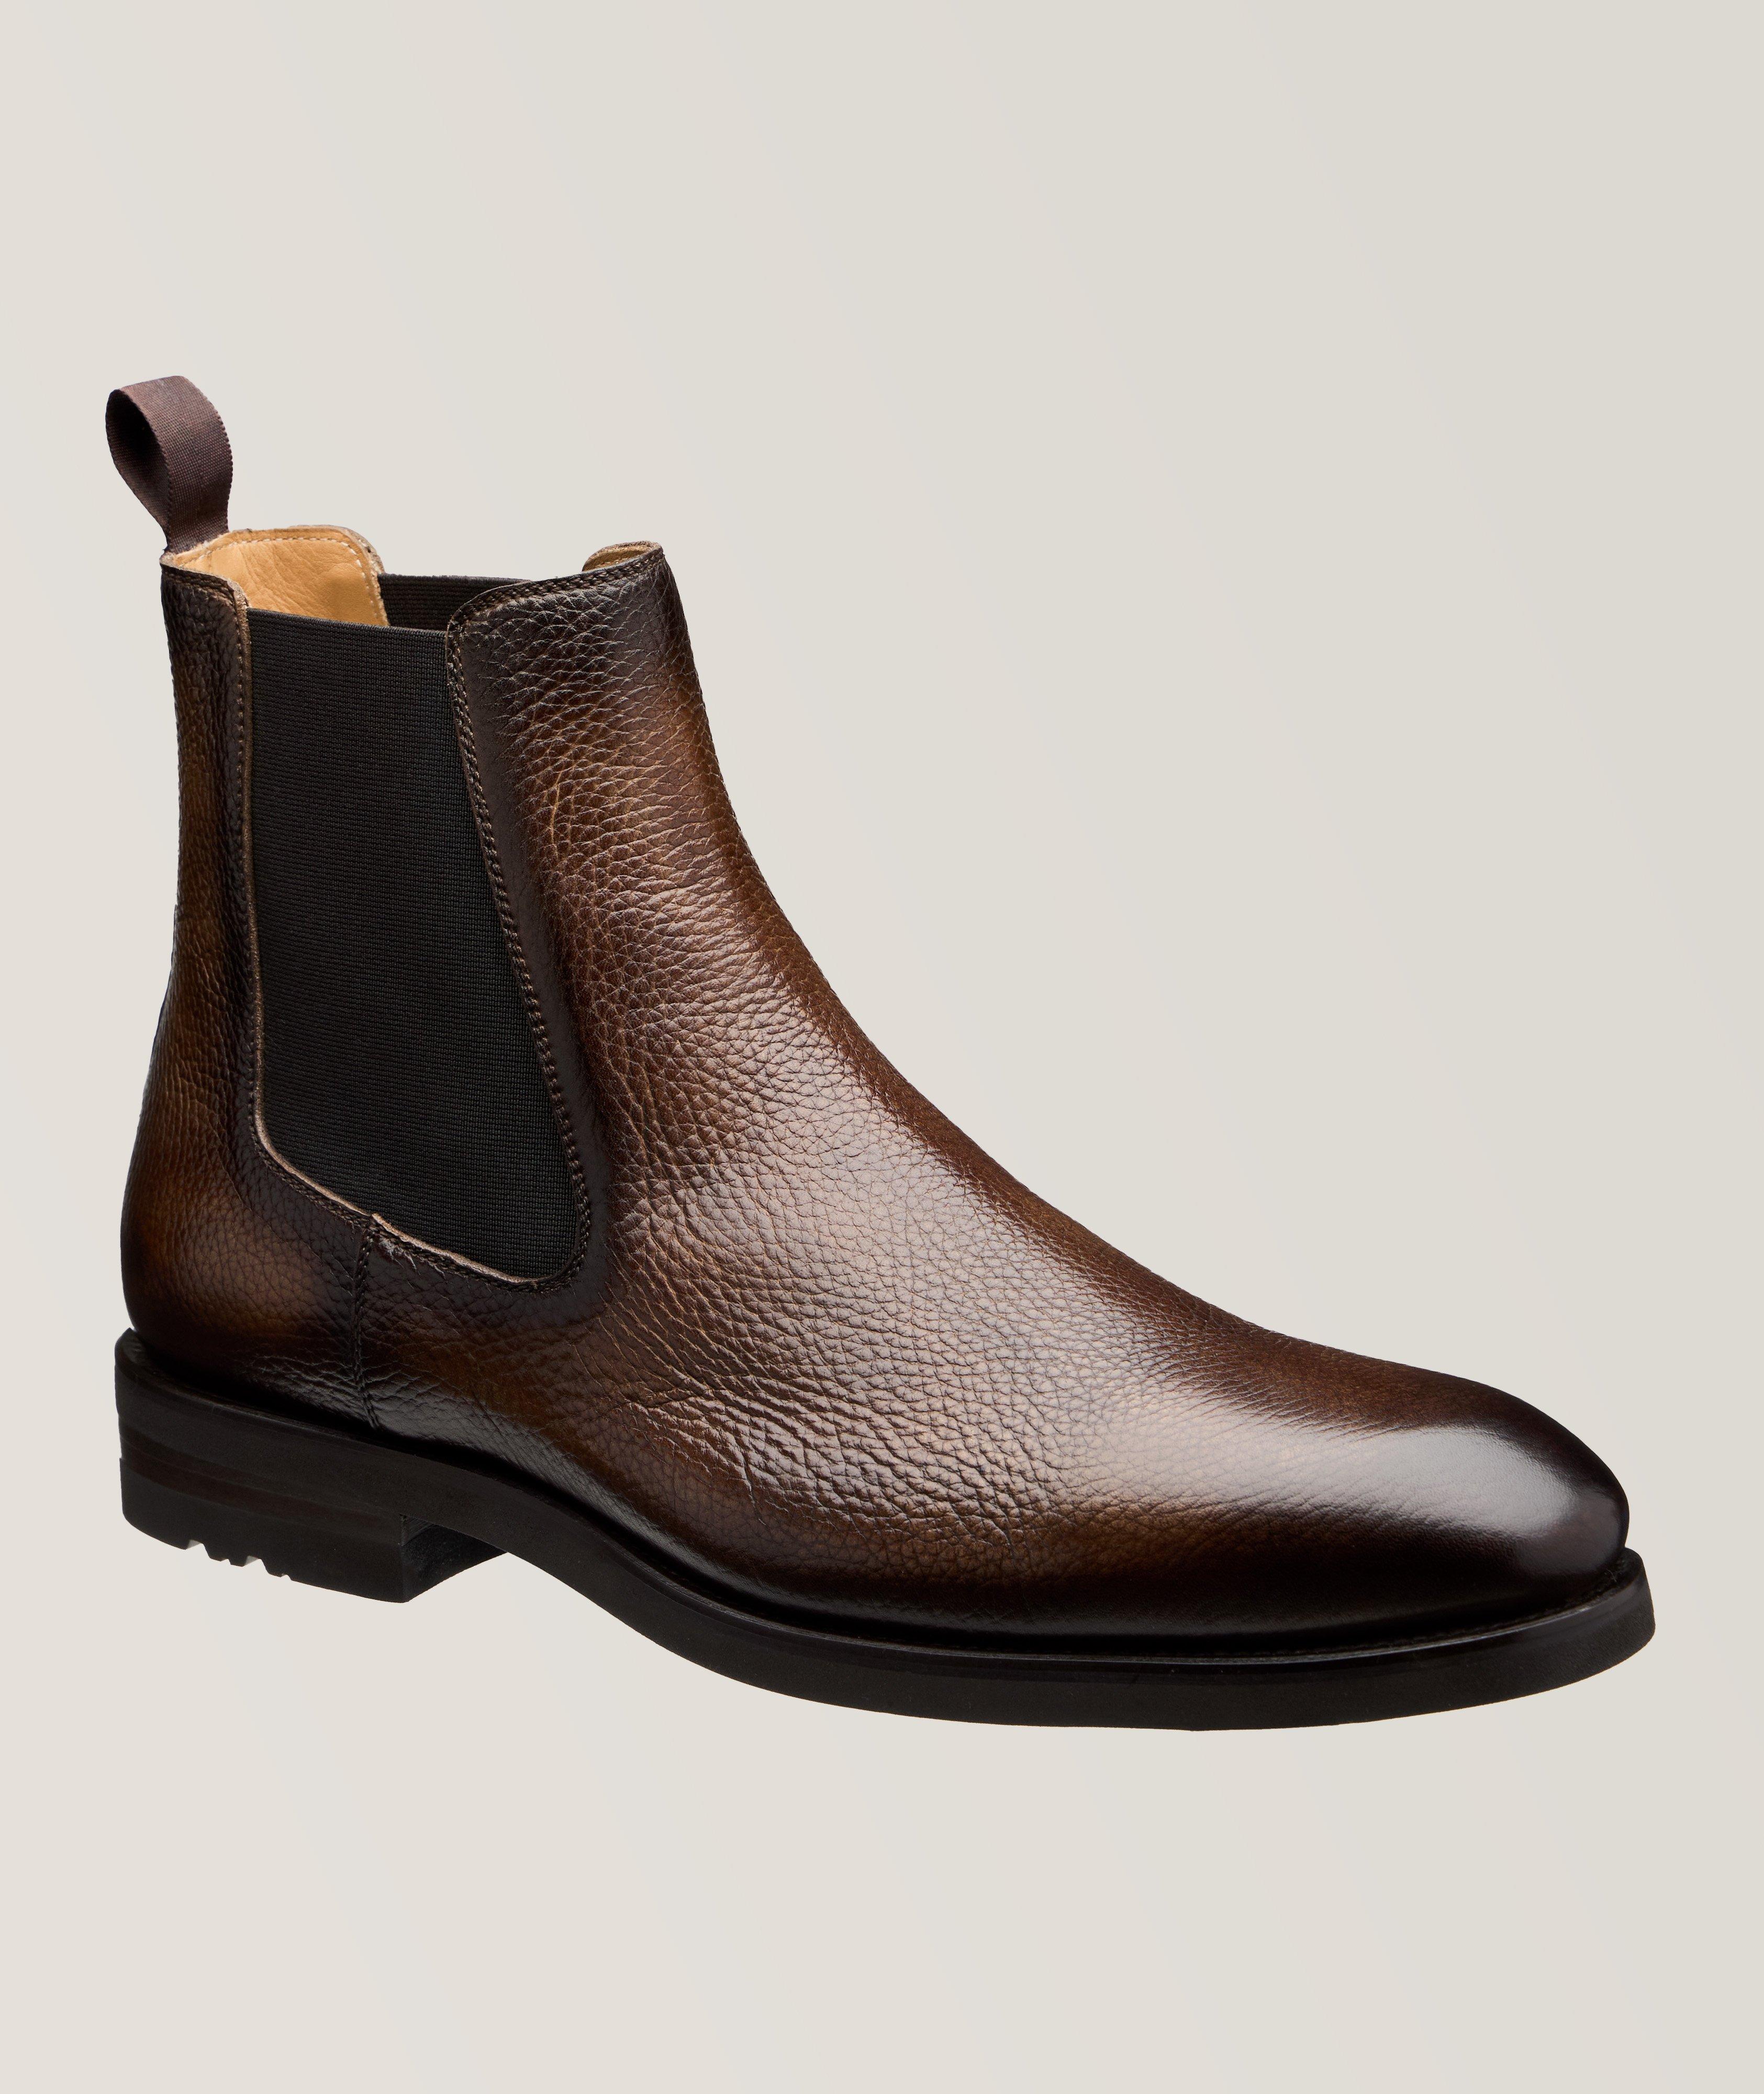 Grained Leather Chelsea Boots image 0